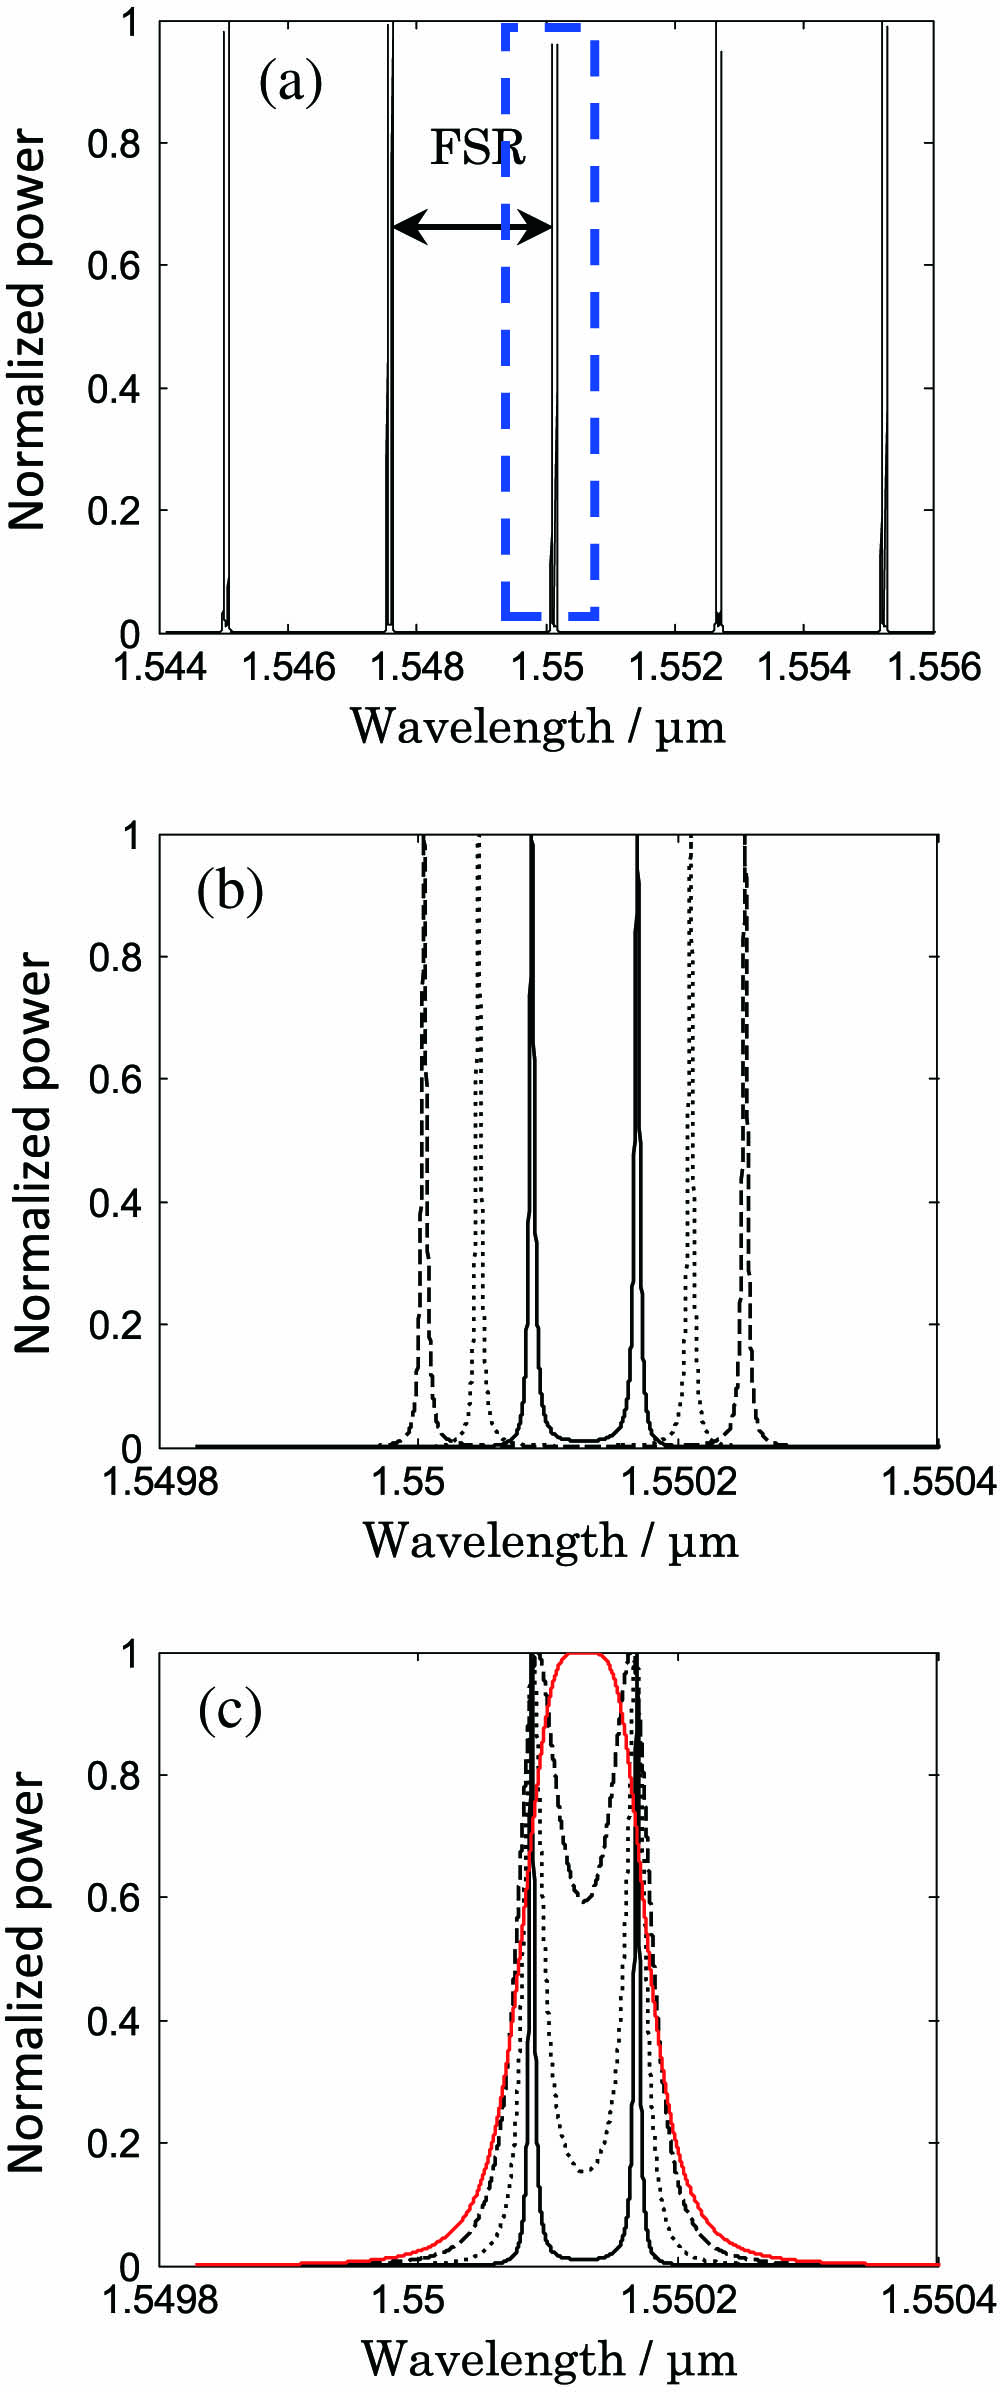 (a) Spectral responses of series-coupled double-ring resonator. (b),(c) Influence of coupling coefficients on the resonant passband within the zoom-in area of (a). (b) Internal coupling coefficients K1=0.1 (solid), 0.2 (dotted), and 0.3 (dashed) when K0=K2=0.1. (c) External coupling coefficients K0=K2=0.1 (solid), 0.2 (dotted), 0.3 (dashed), and 0.426 (red) when K1=0.1.